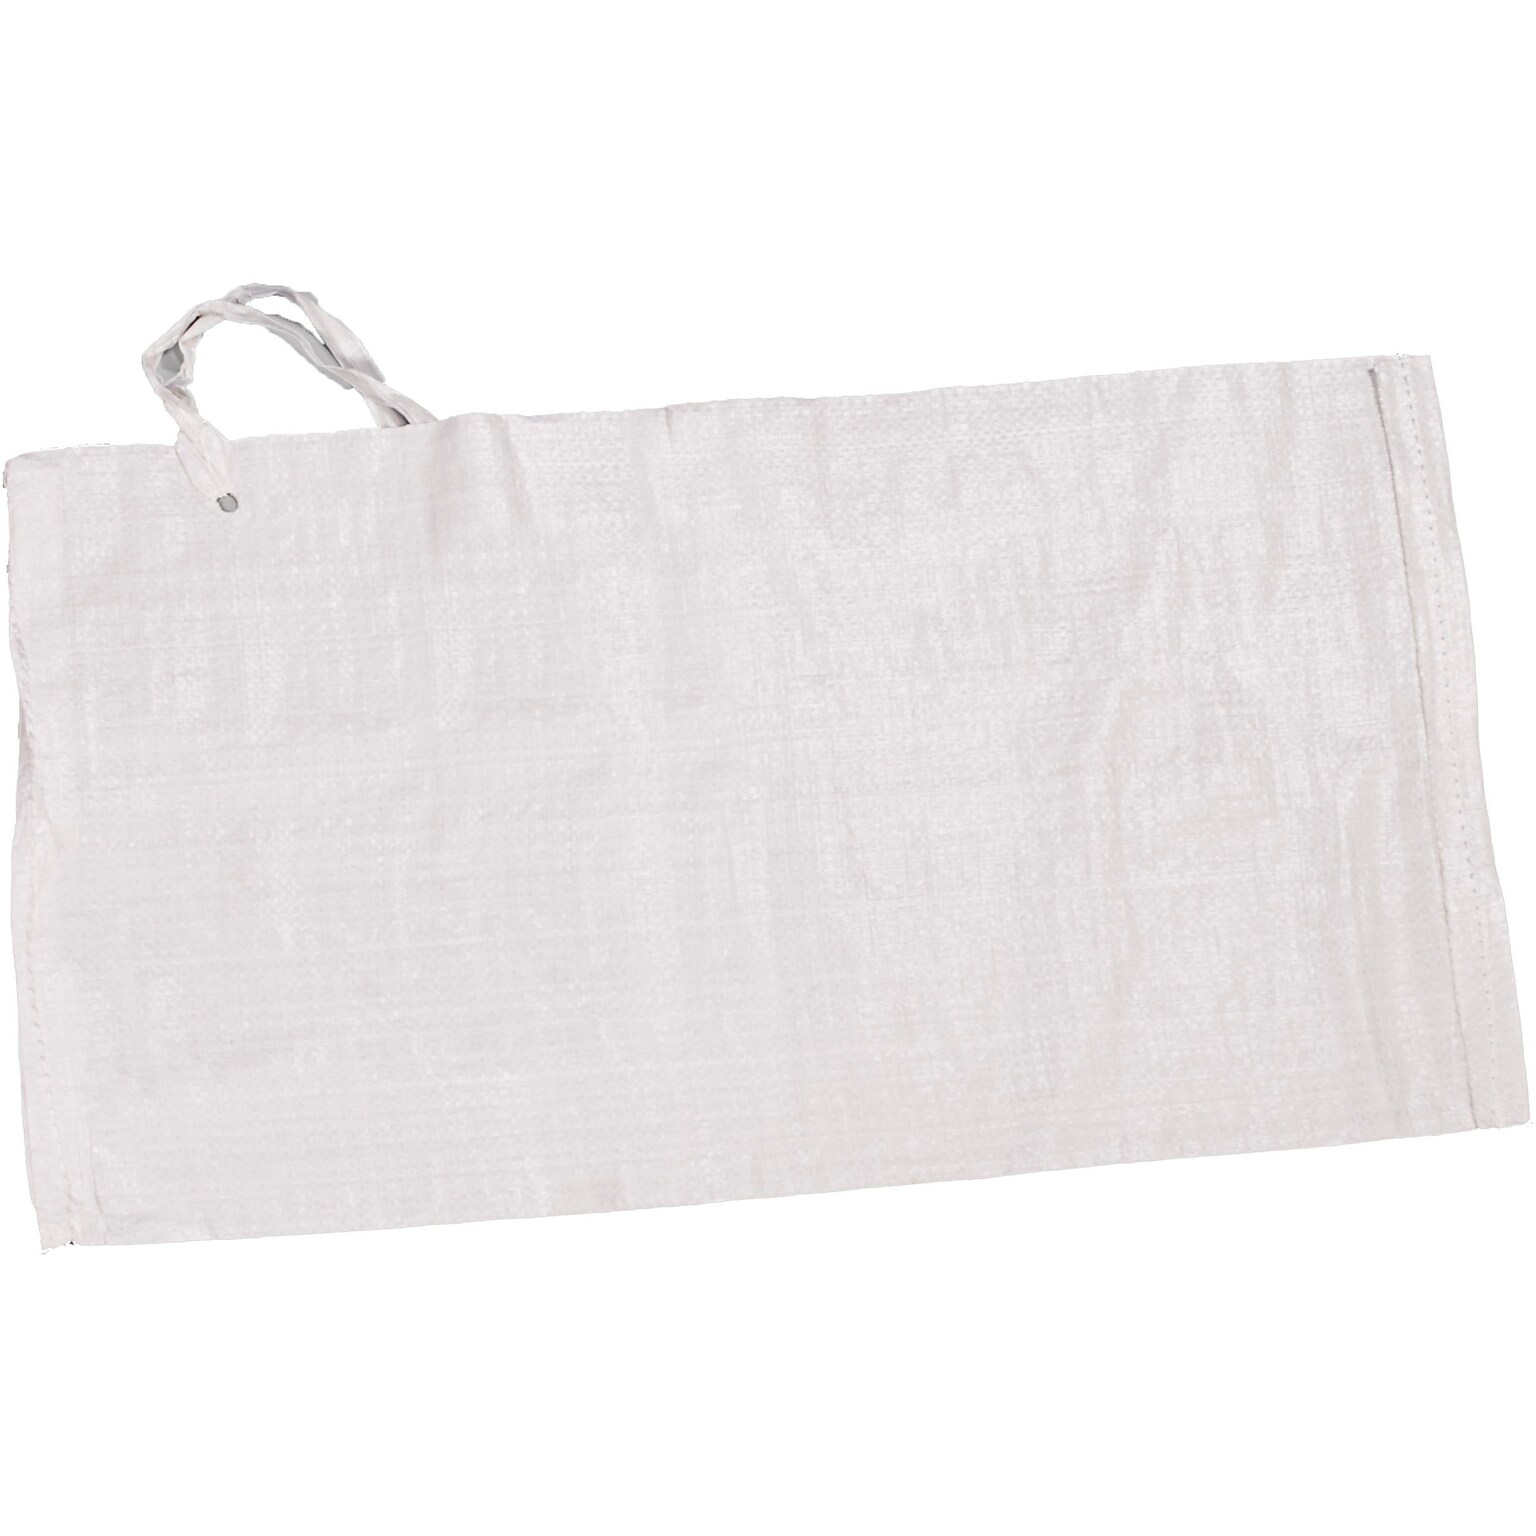 Mutual Industries Sand Bag, 14x 26, White, 1000/Pack